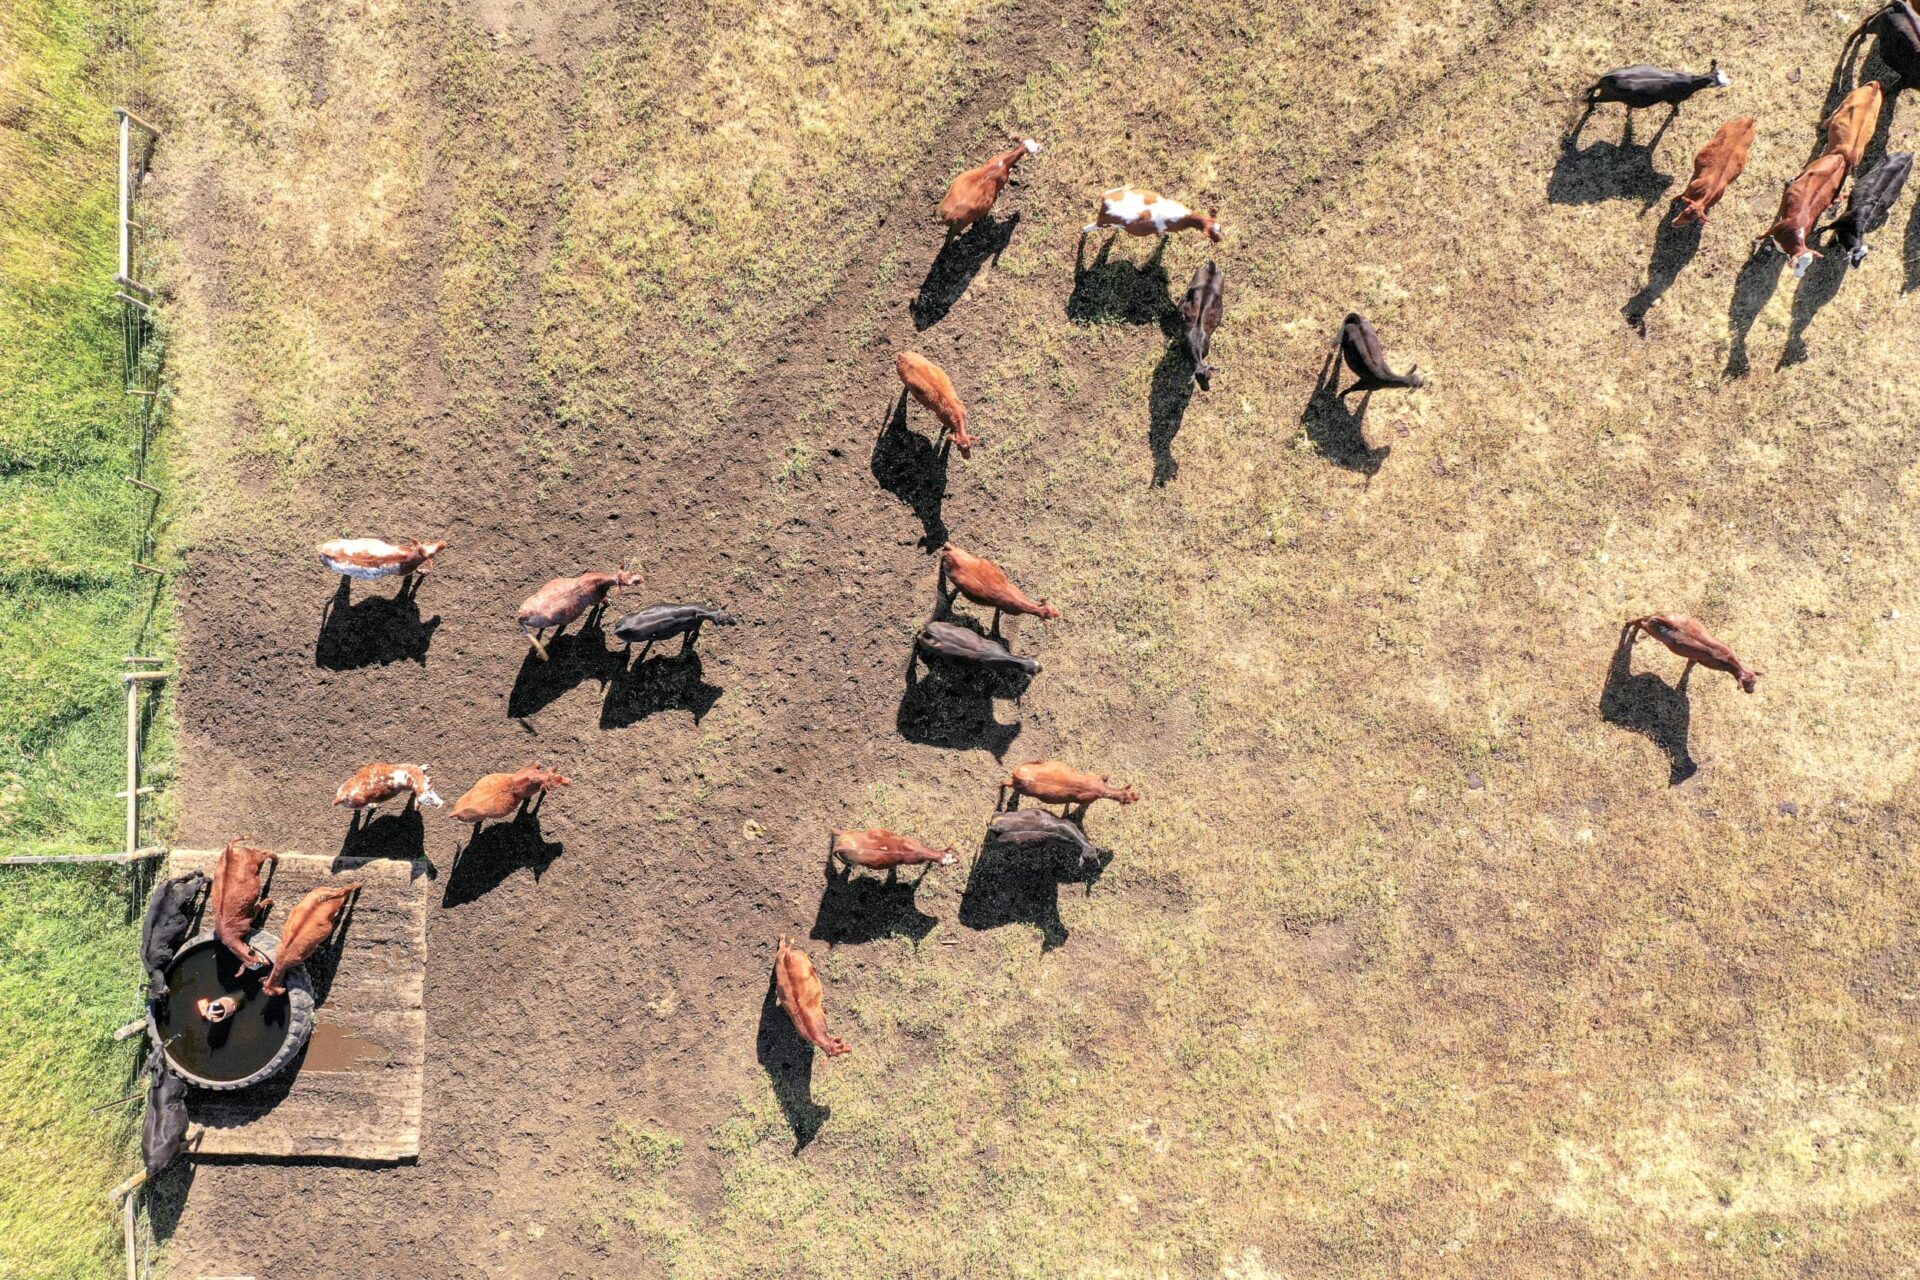 A cattle from the air.